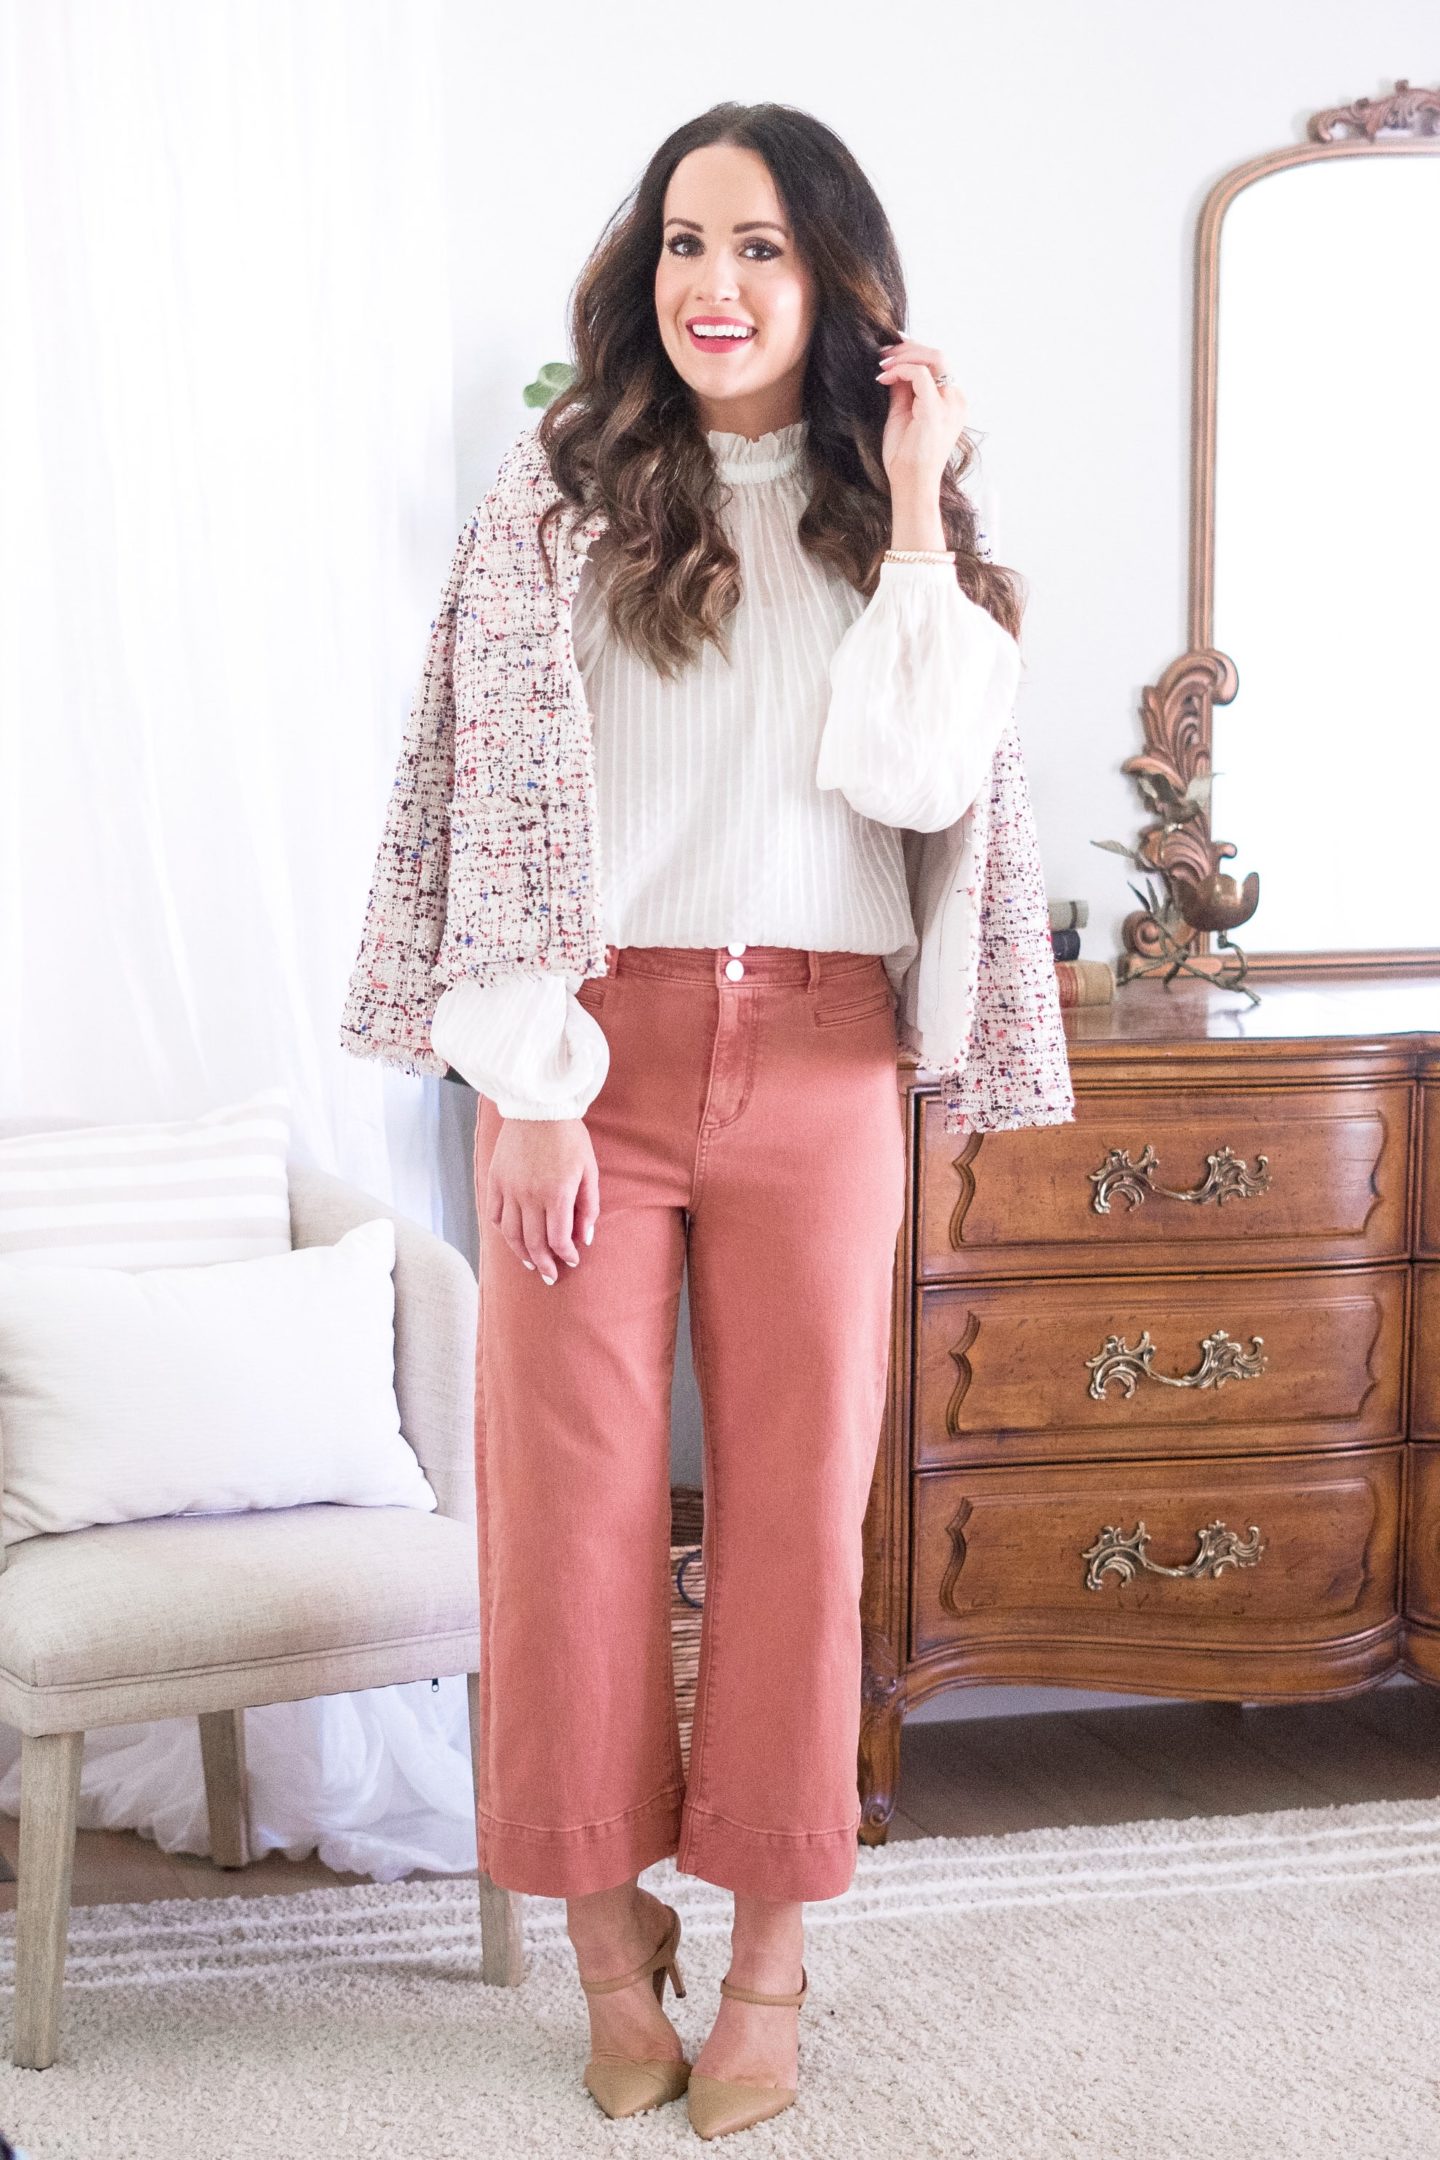 Chic & Comfy Style + Our Work From Home Tips - The Double Take Girls